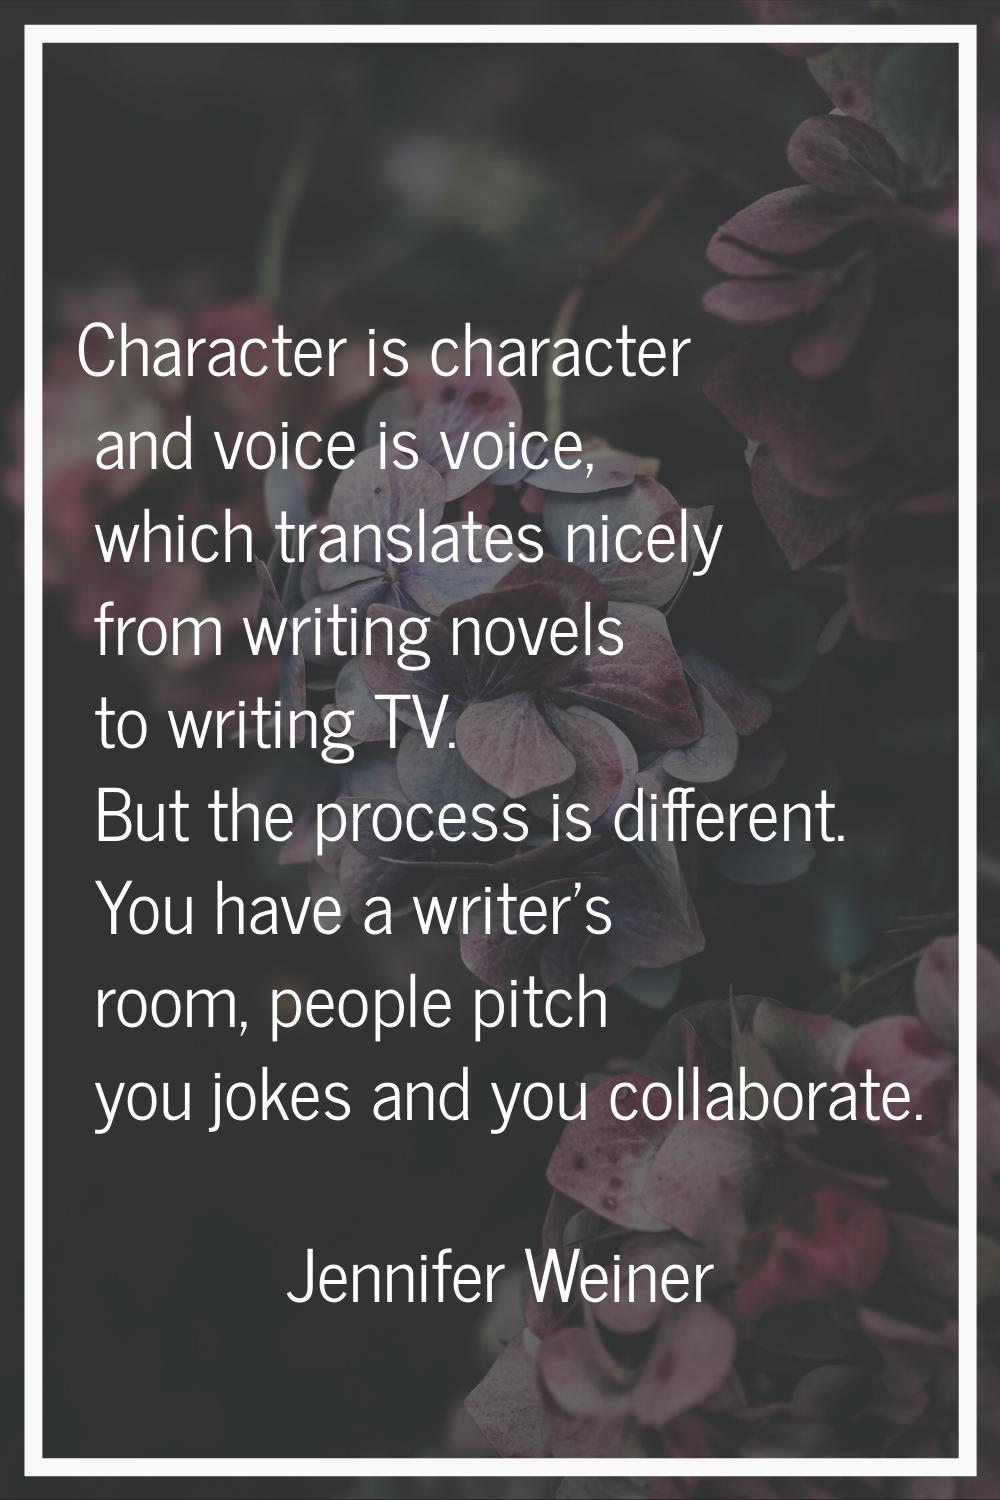 Character is character and voice is voice, which translates nicely from writing novels to writing T